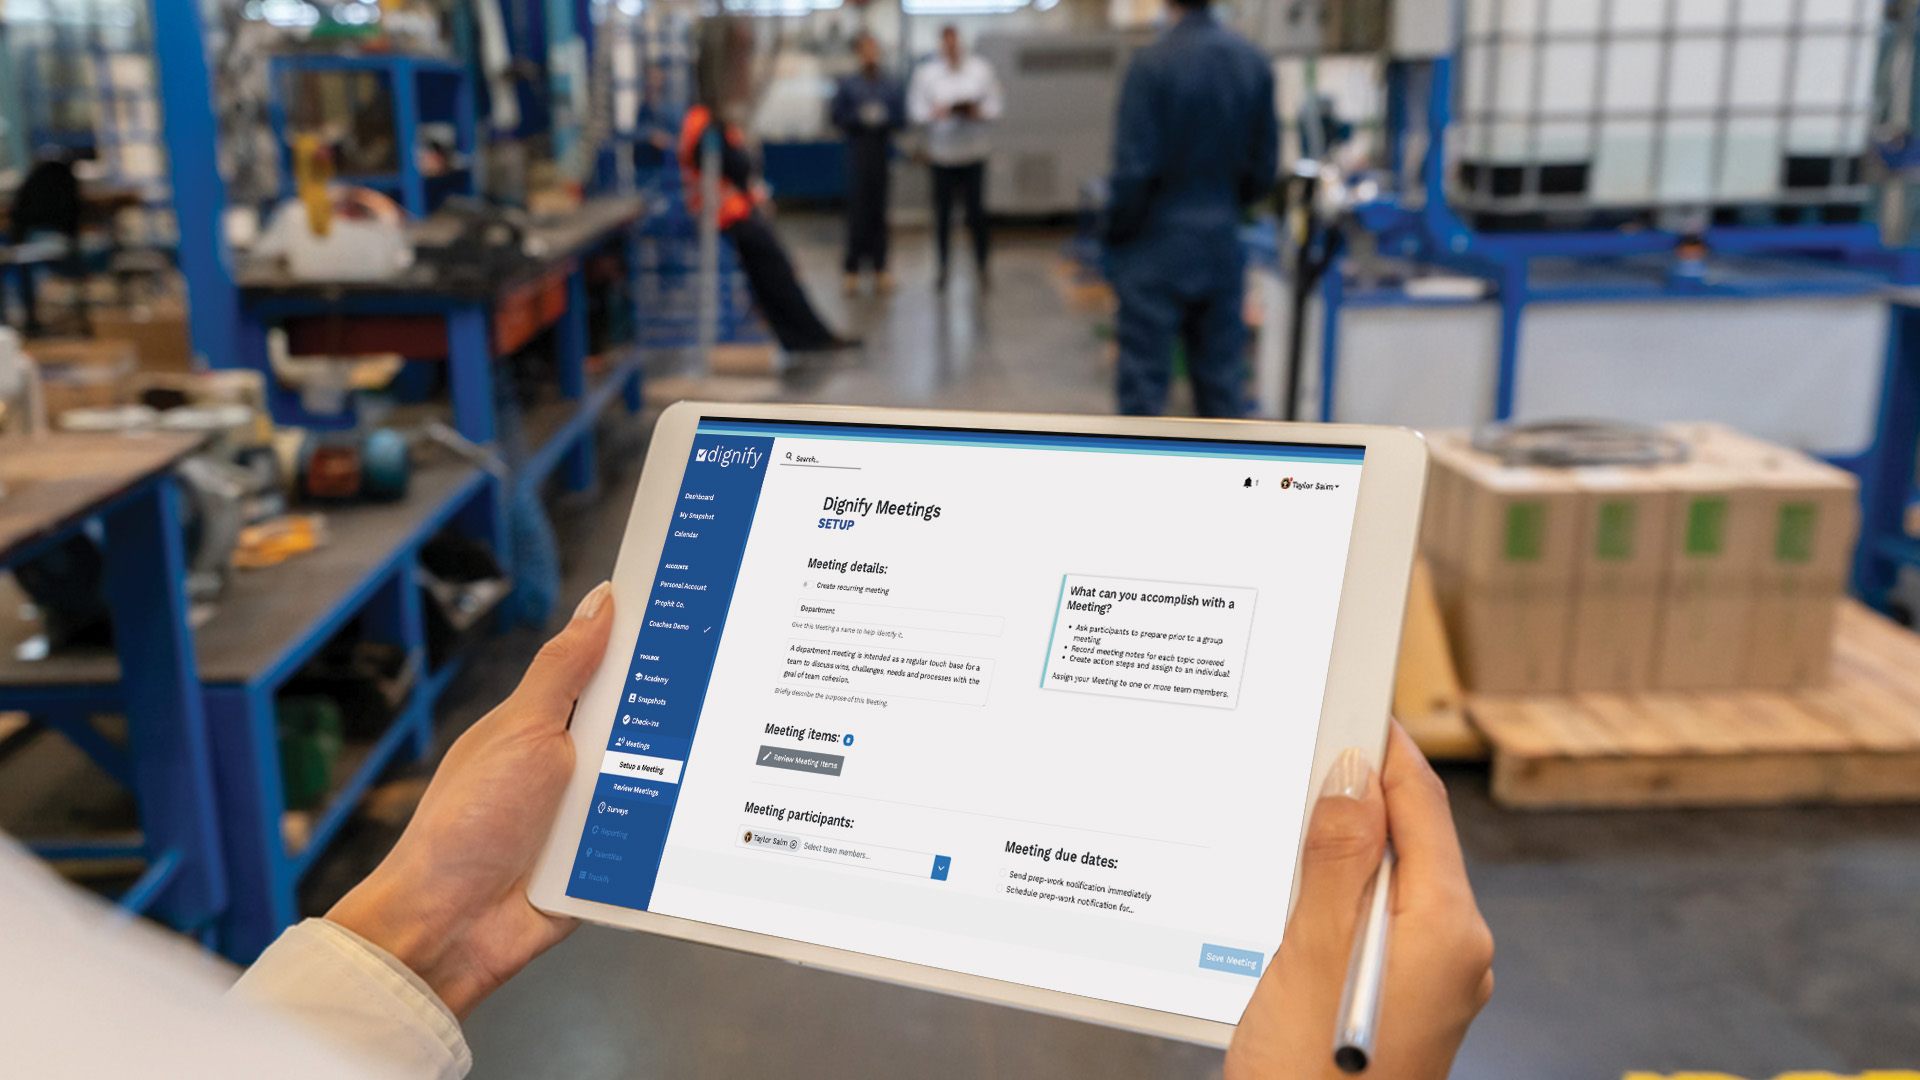 Manufacturing leader holding a tablet setting up a Dignify Meeting